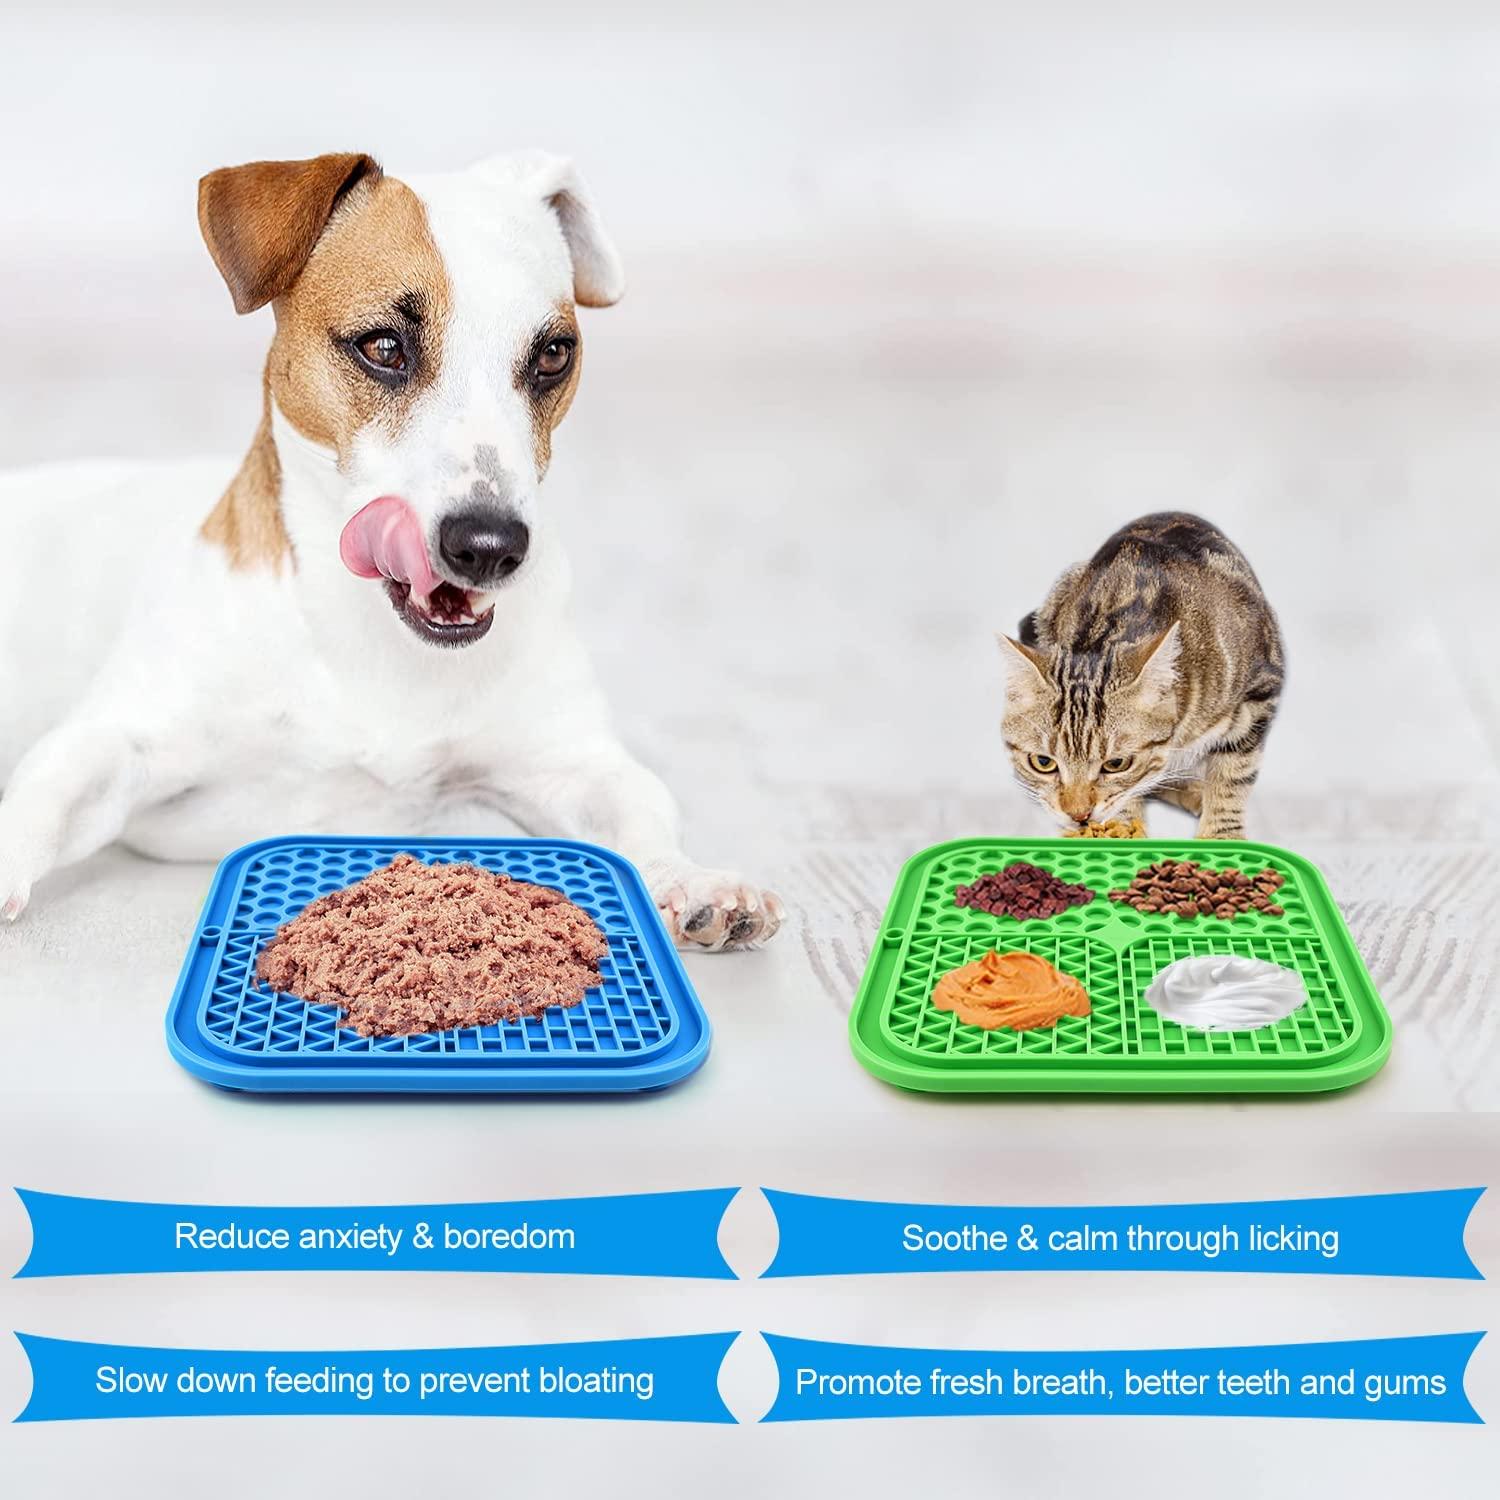 Slow Lick Mat for Dogs & Cats - Helps Pet Reduce Boredom & Anxiety